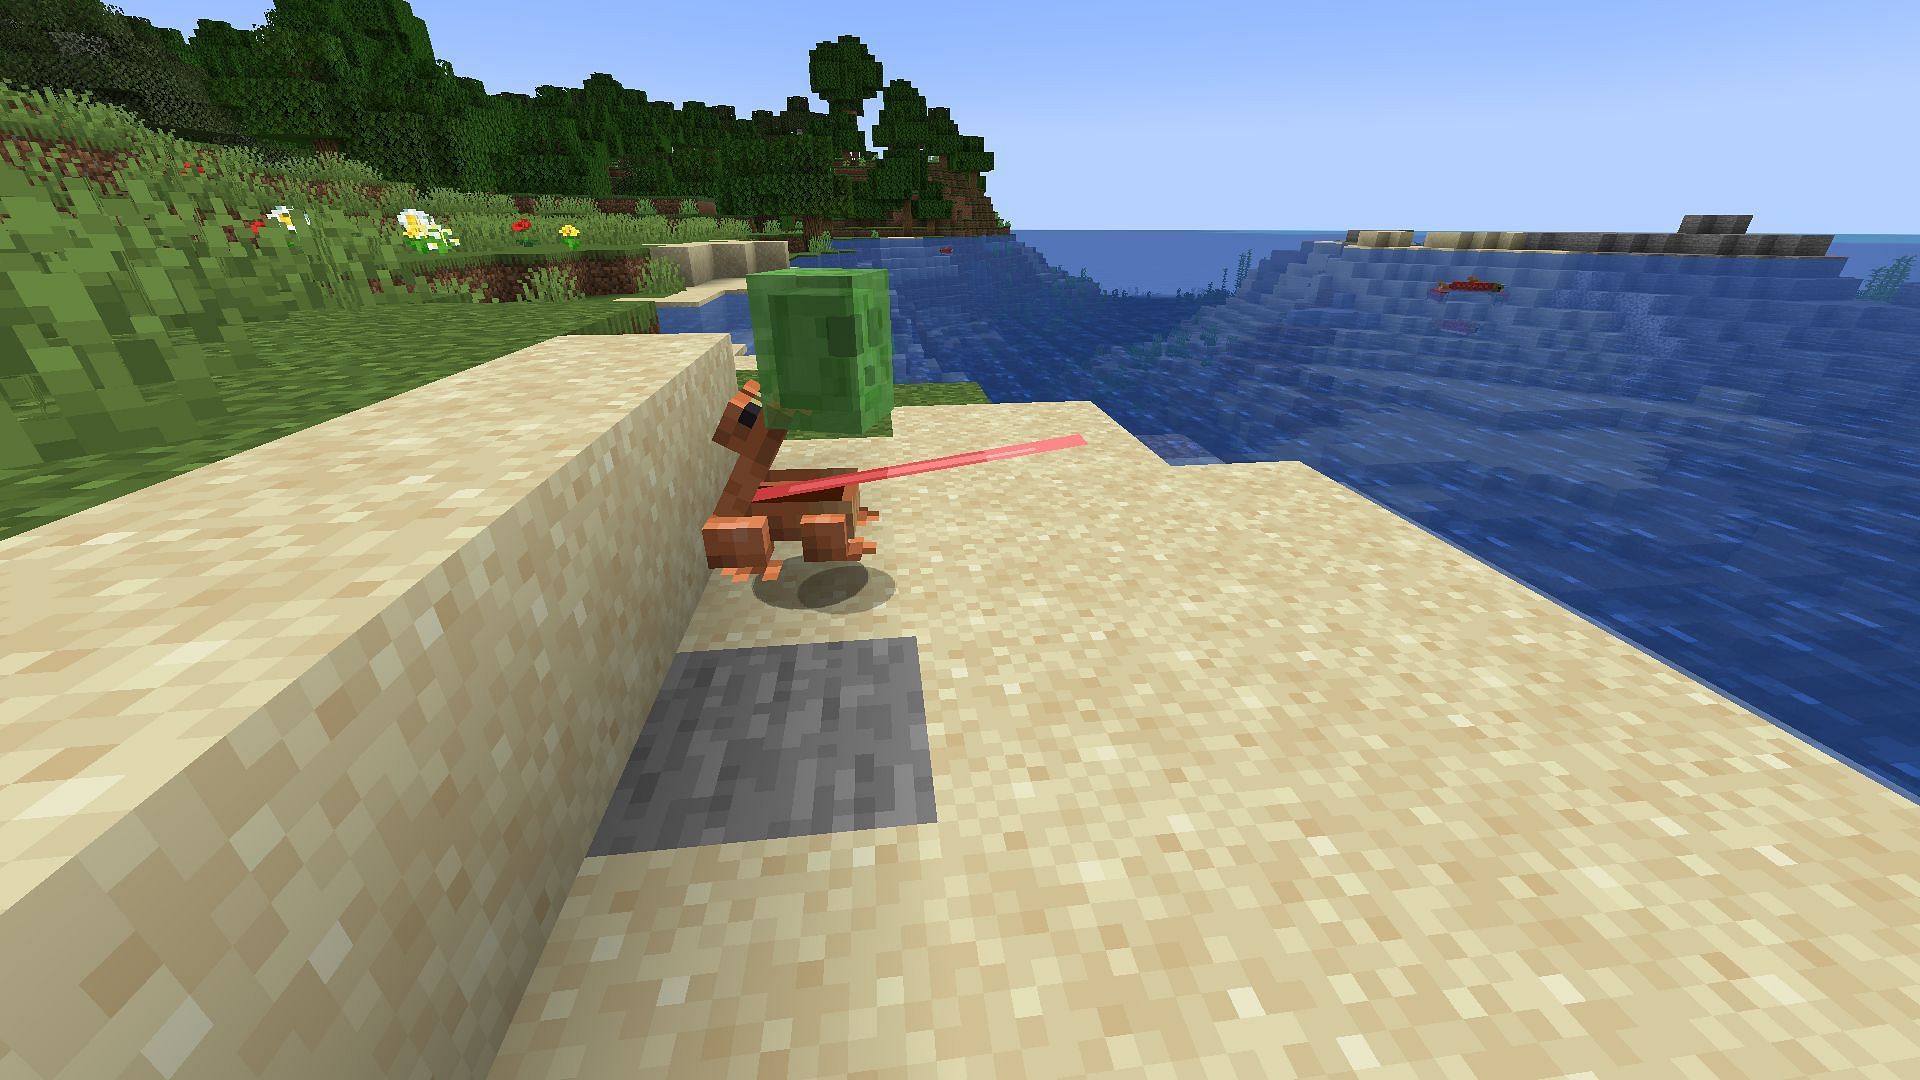 Slimes being killed by the mob (Image via Minecraft)